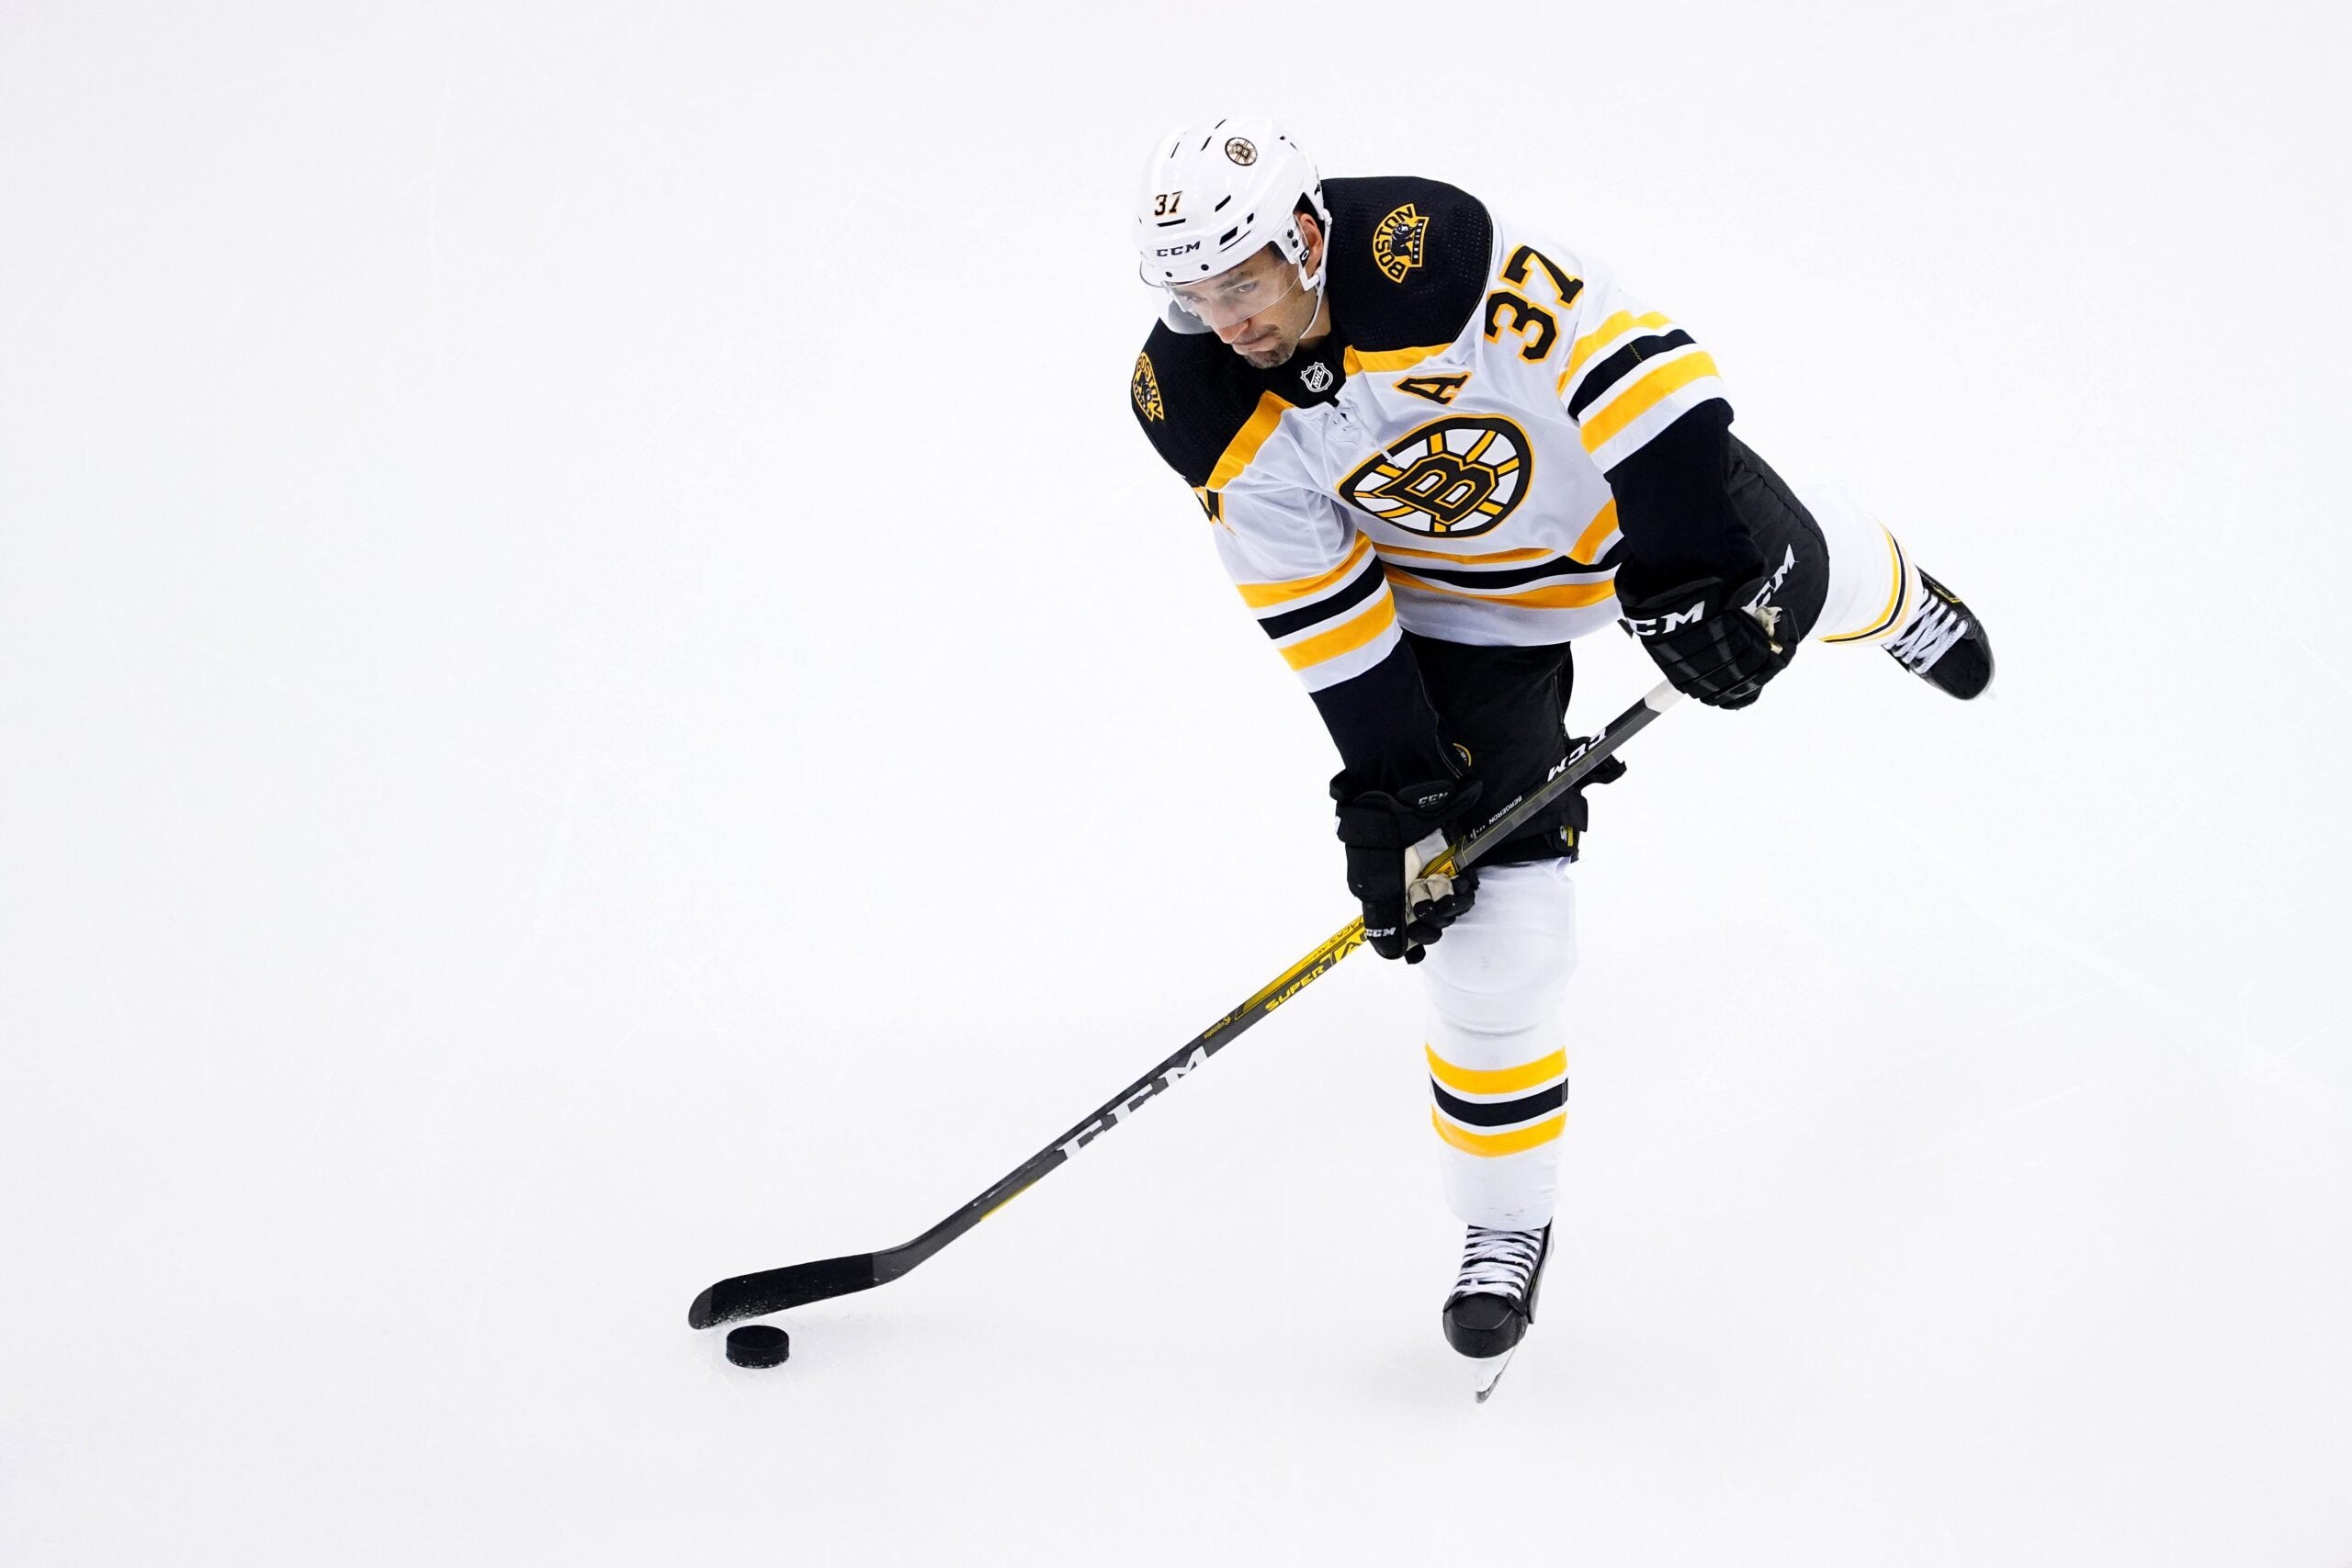 Patrice Bergeron in line to replace Zdeno Chara as Boston Bruins captain